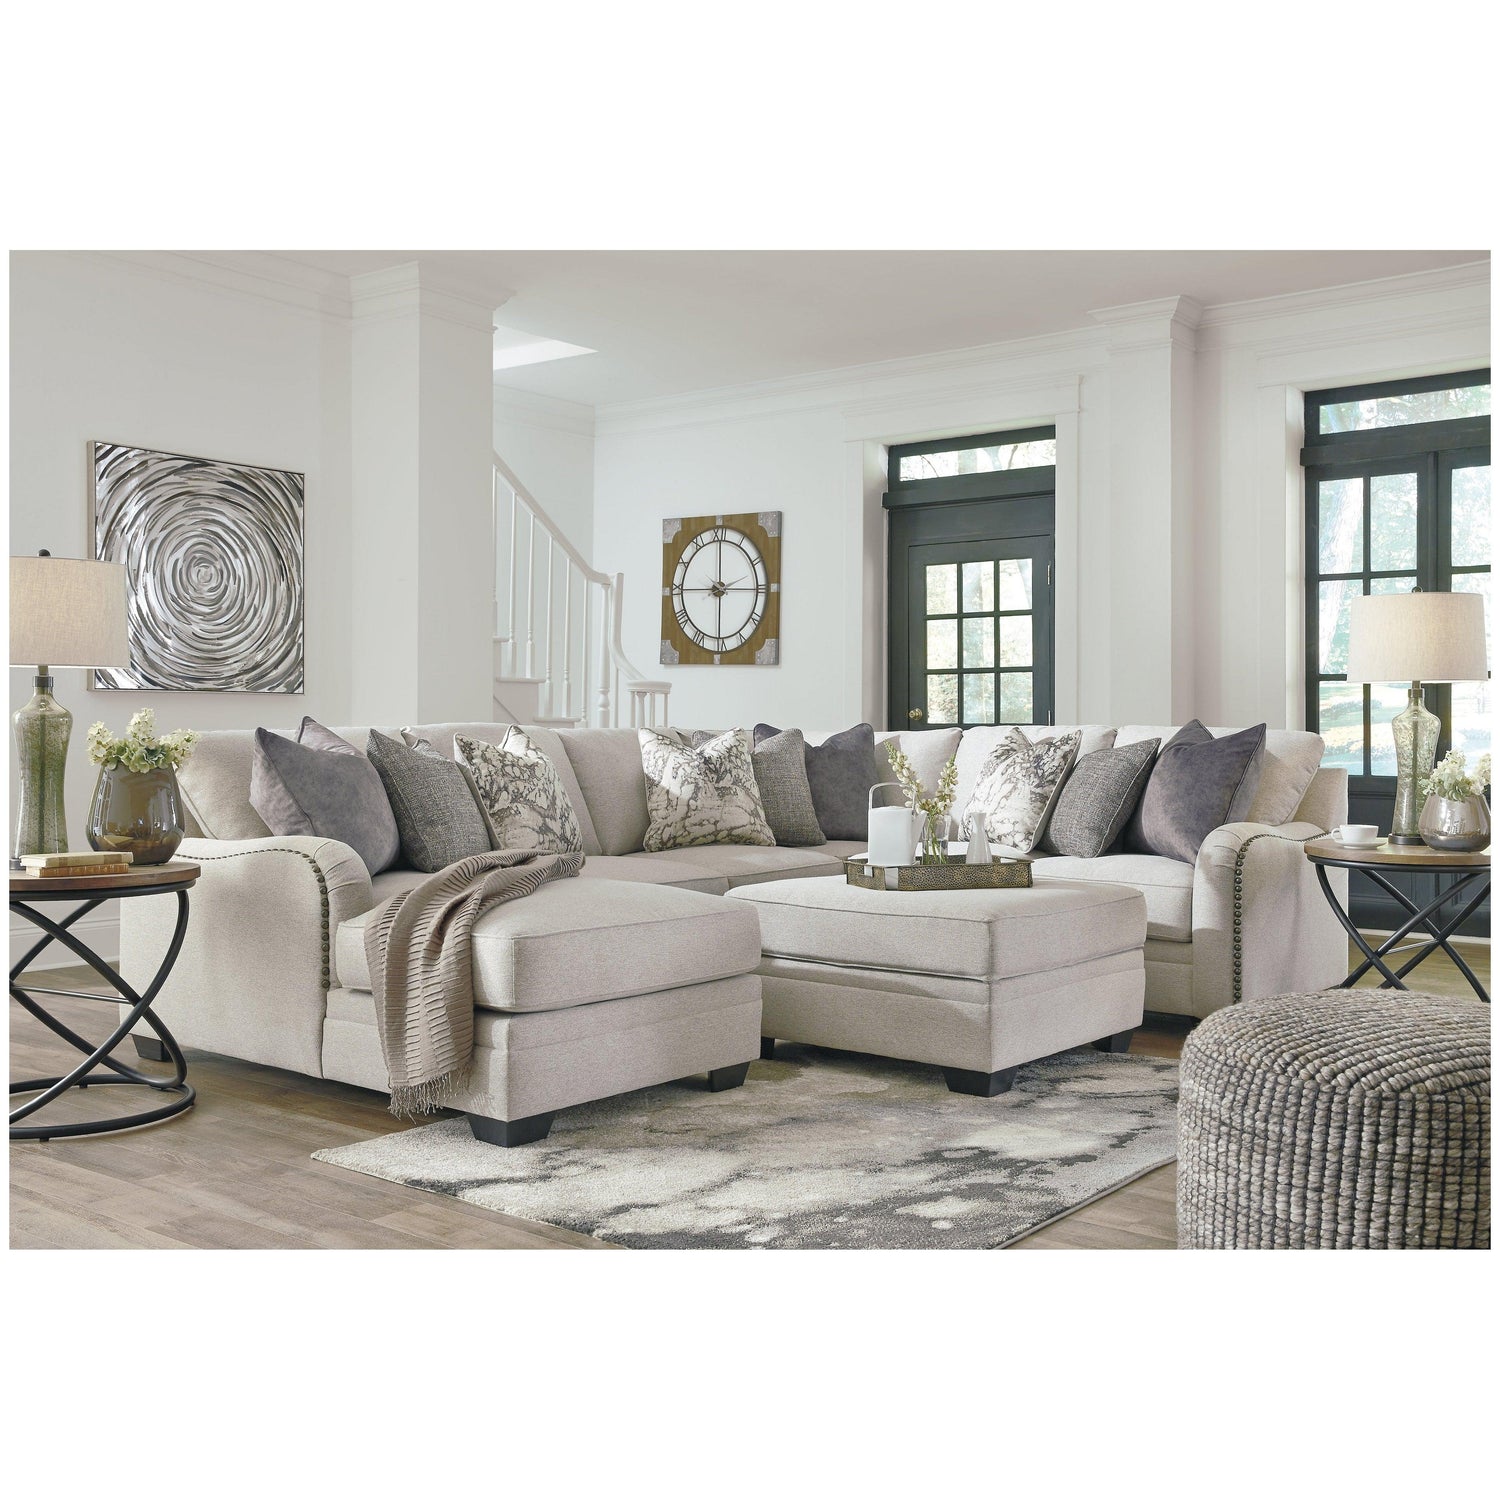 Dellara 4-Piece Sectional with Chaise Ash-32101S5